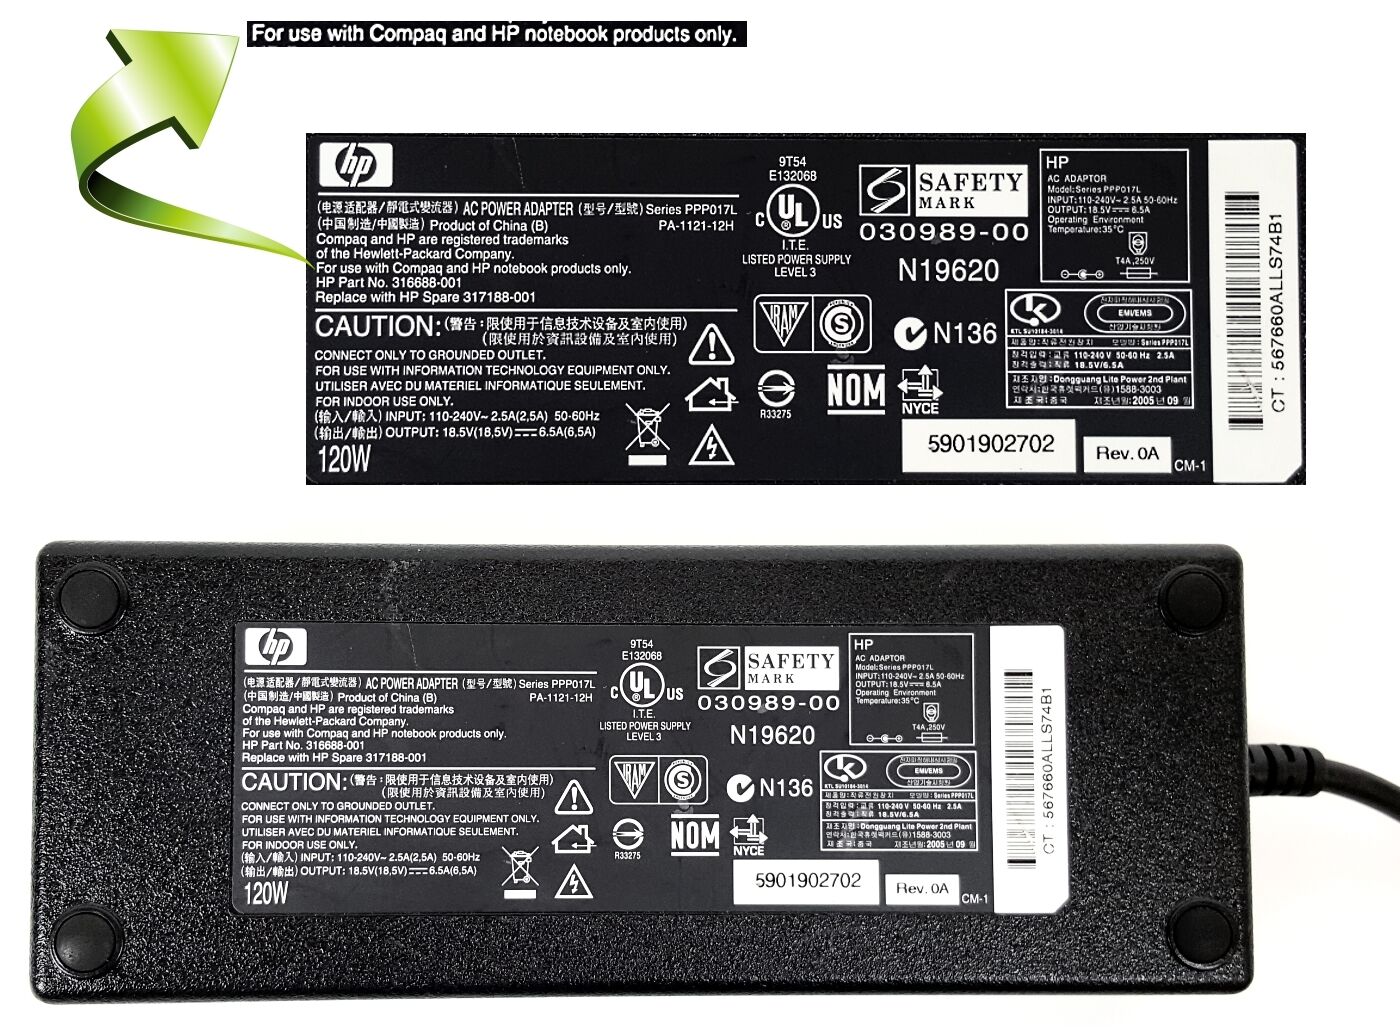  Genuine HP Compaq 120W AC Power Adapter PPP017L PPP017h 316688-001 317188-001